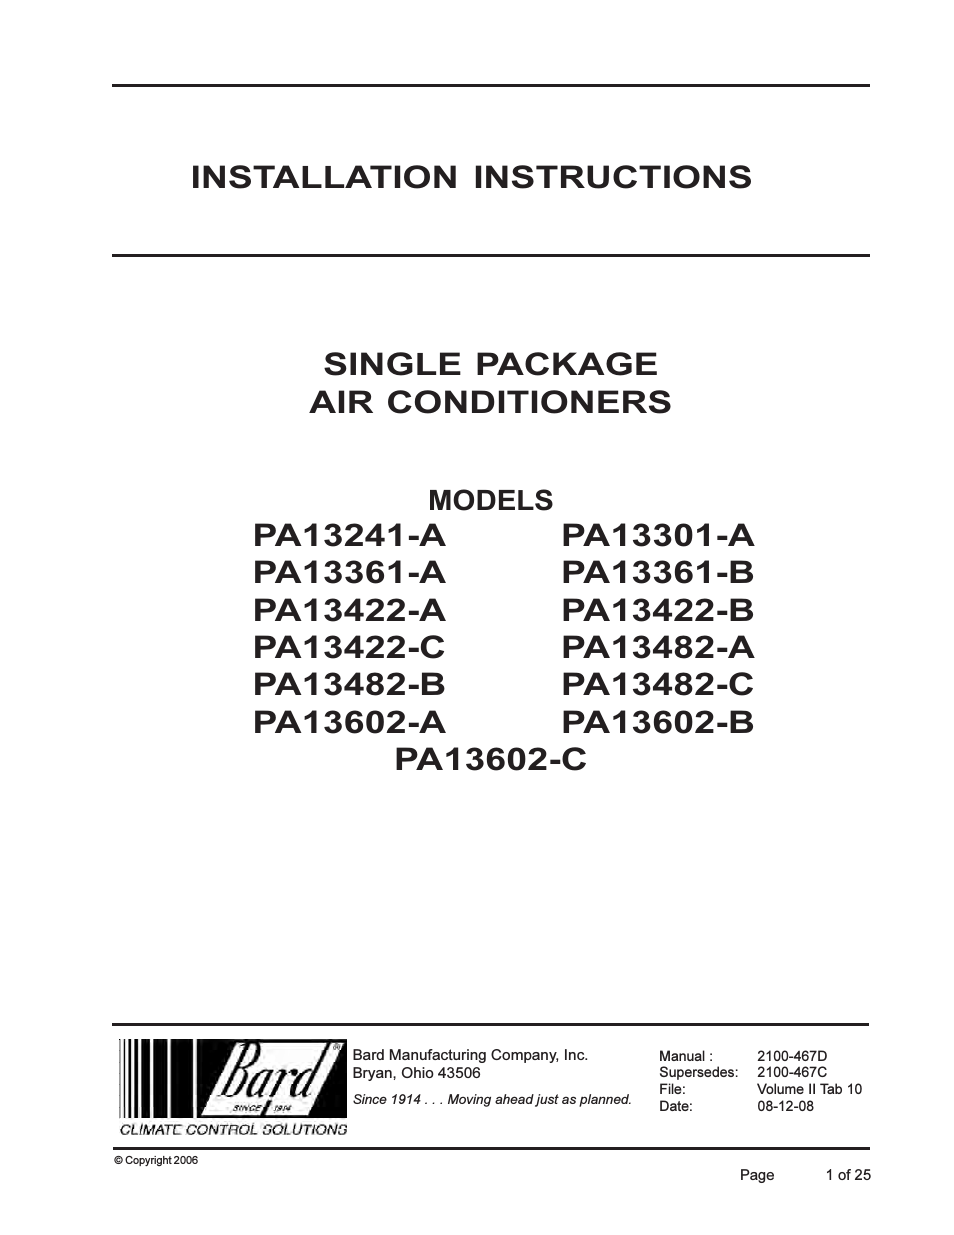 Single Package air Conditioners PA13361-B